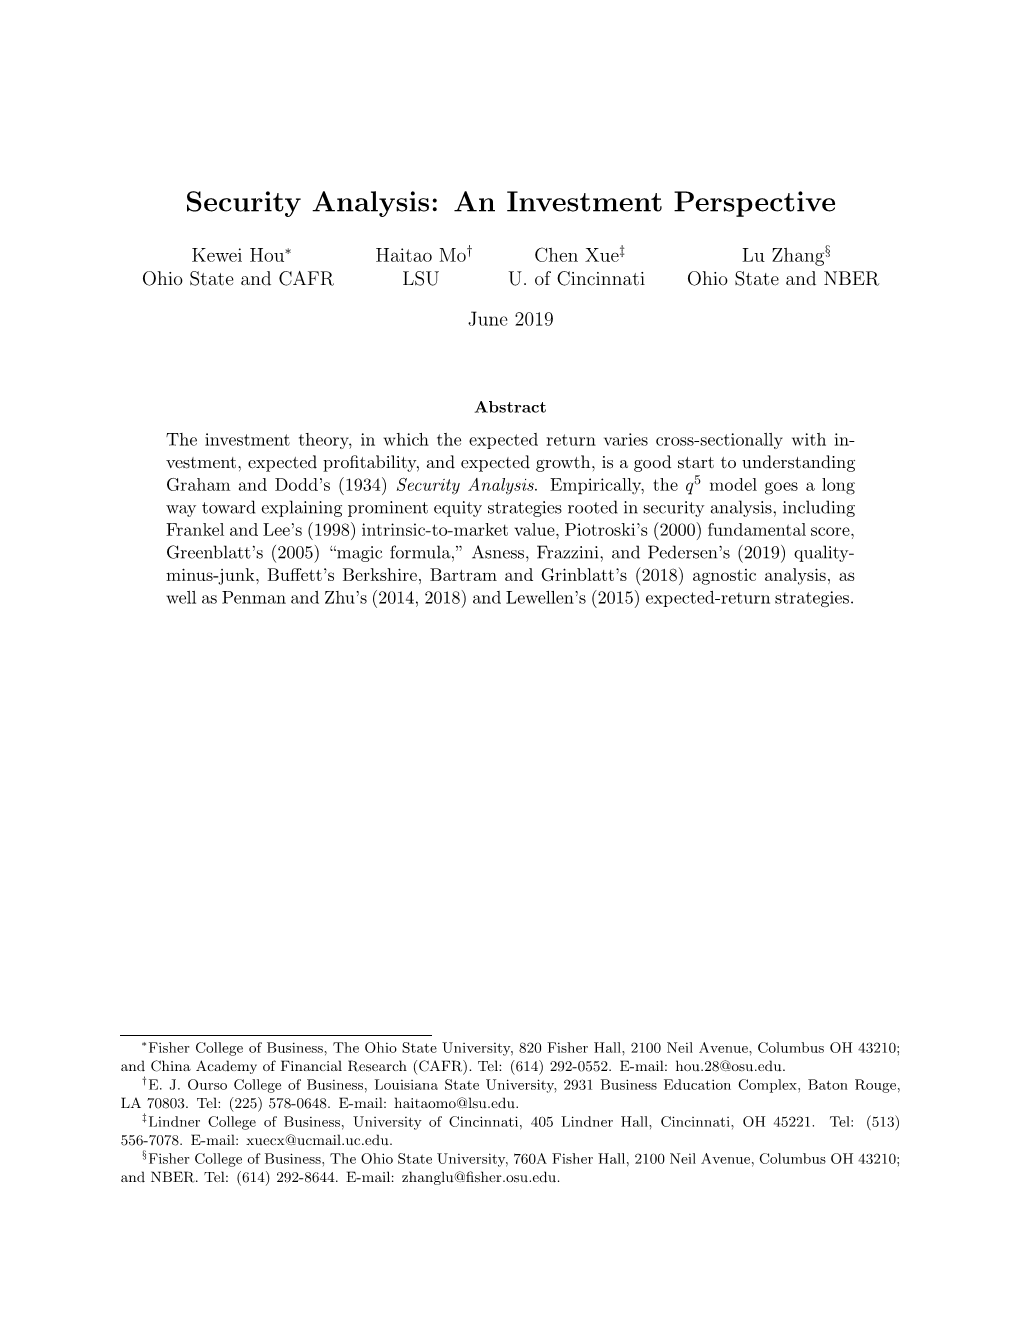 Security Analysis: an Investment Perspective